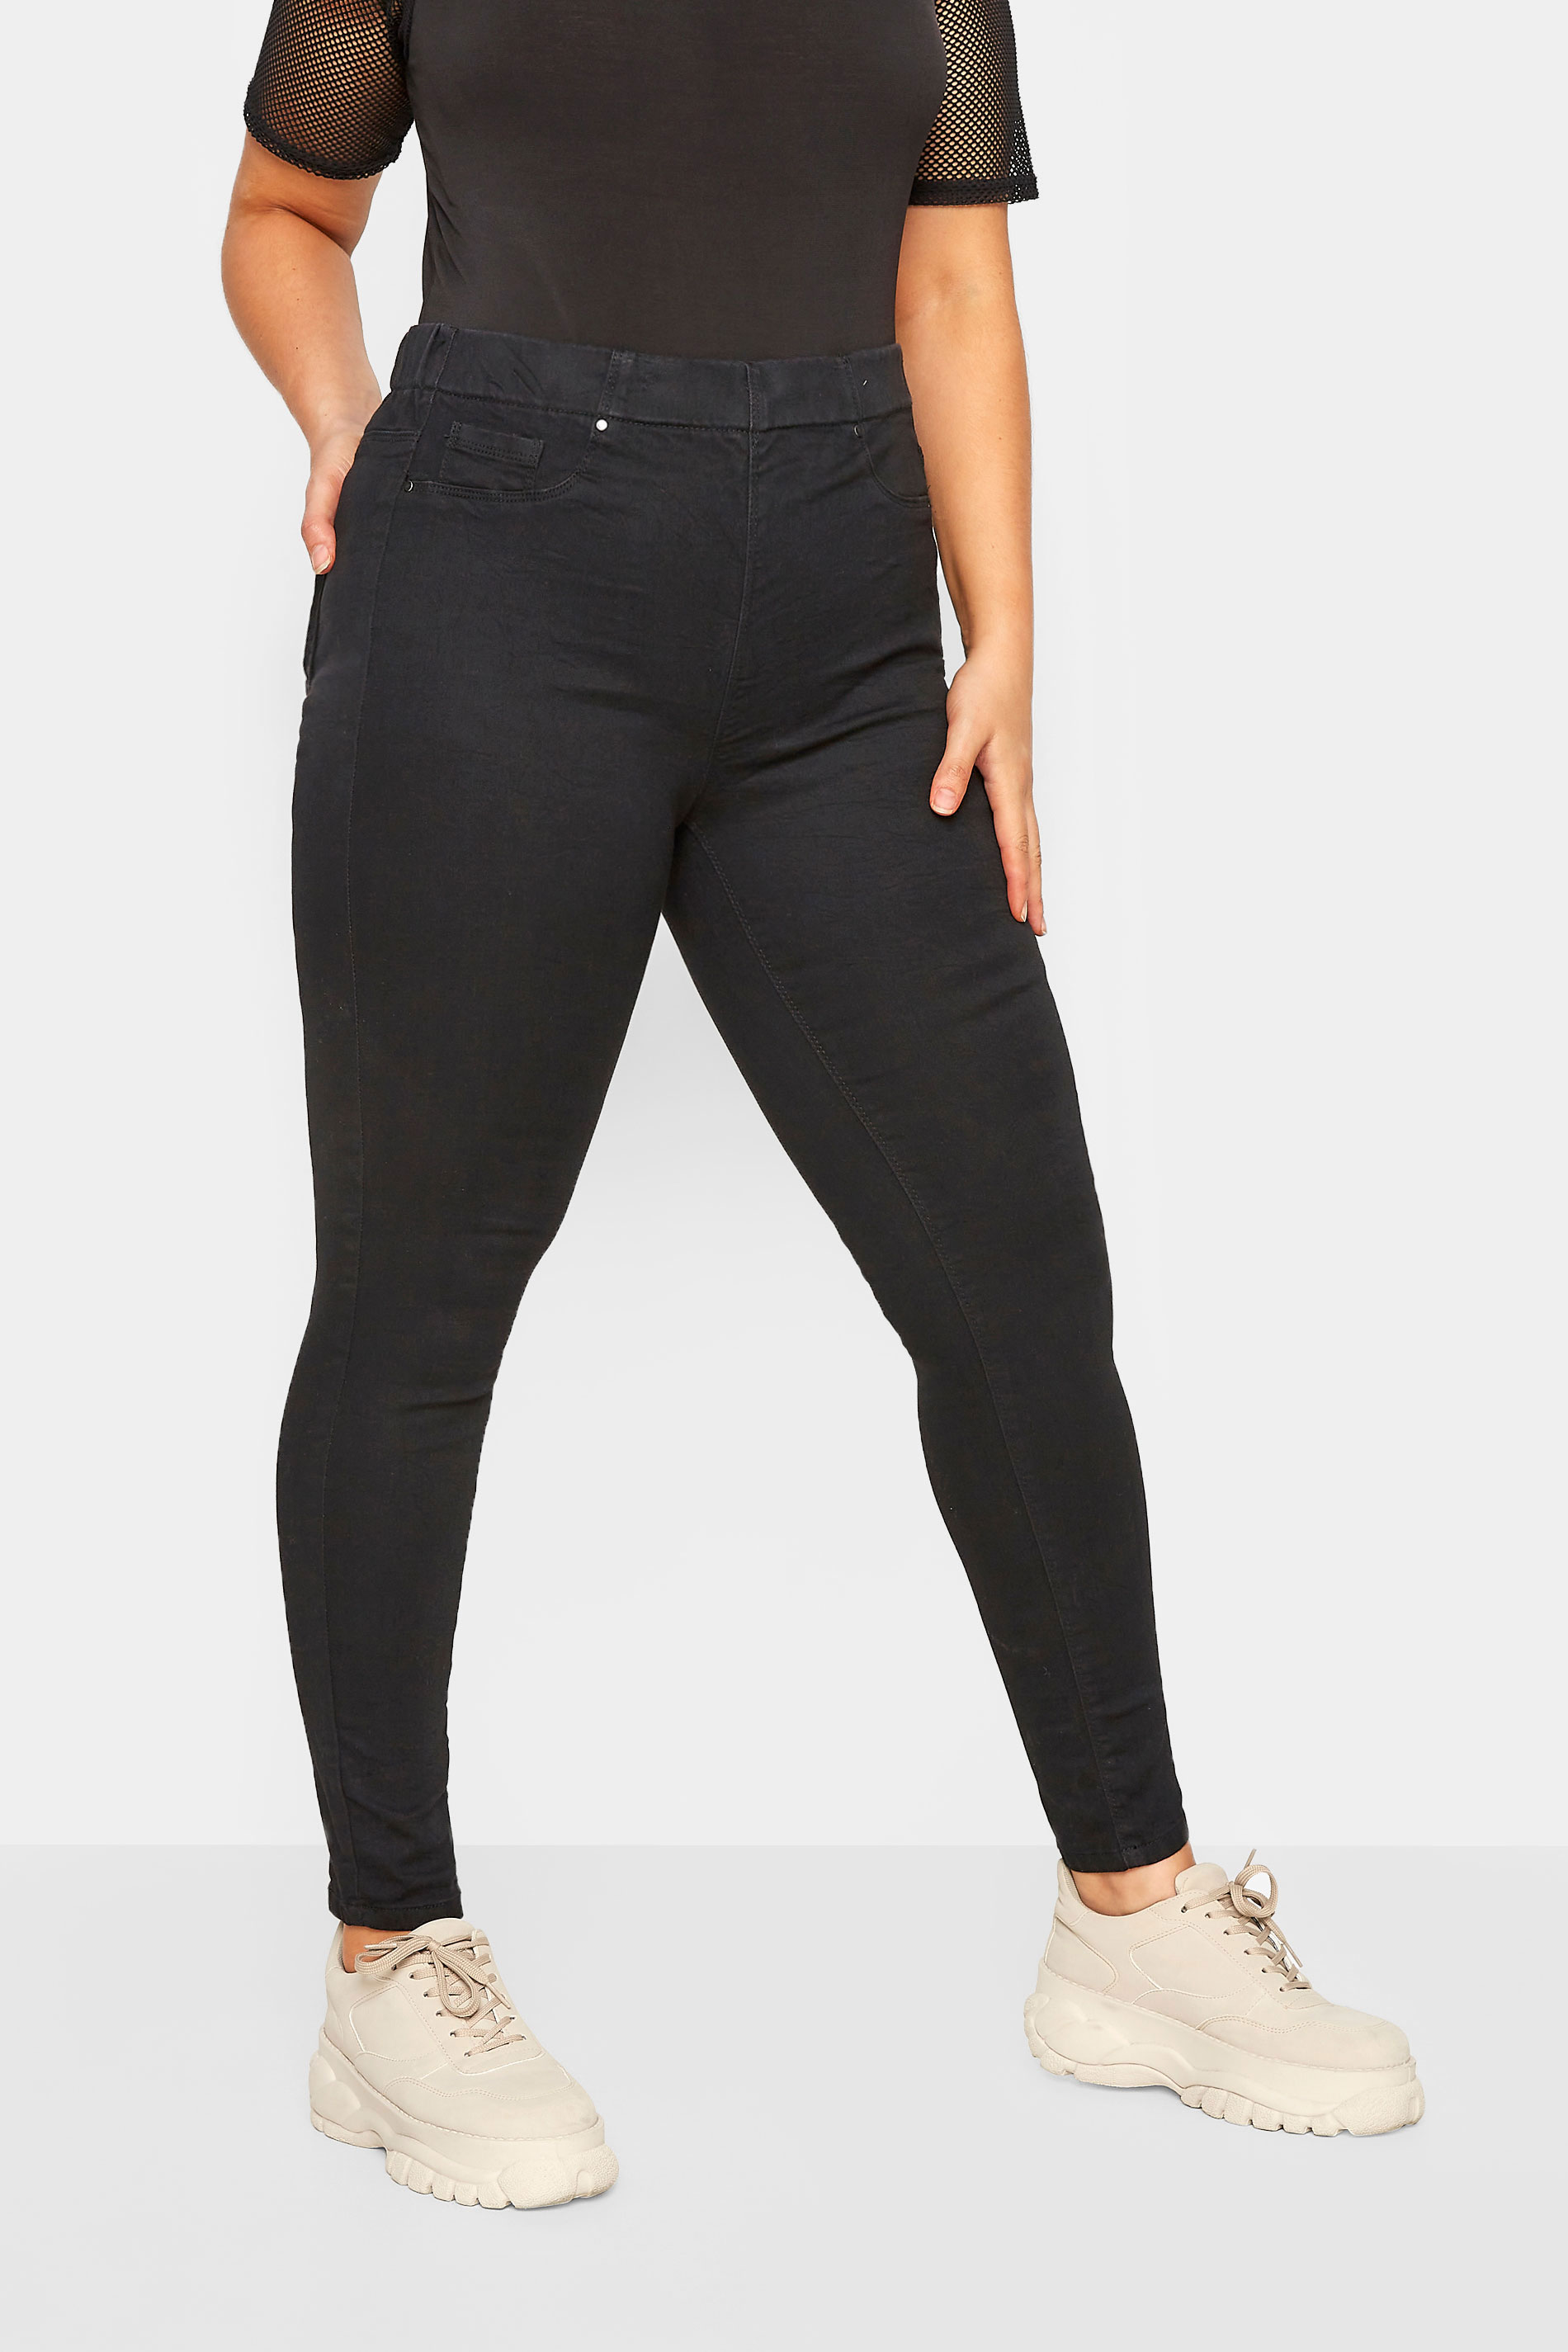 Plus Size Black Pull On JENNY Jeggings | Yours Clothing 1